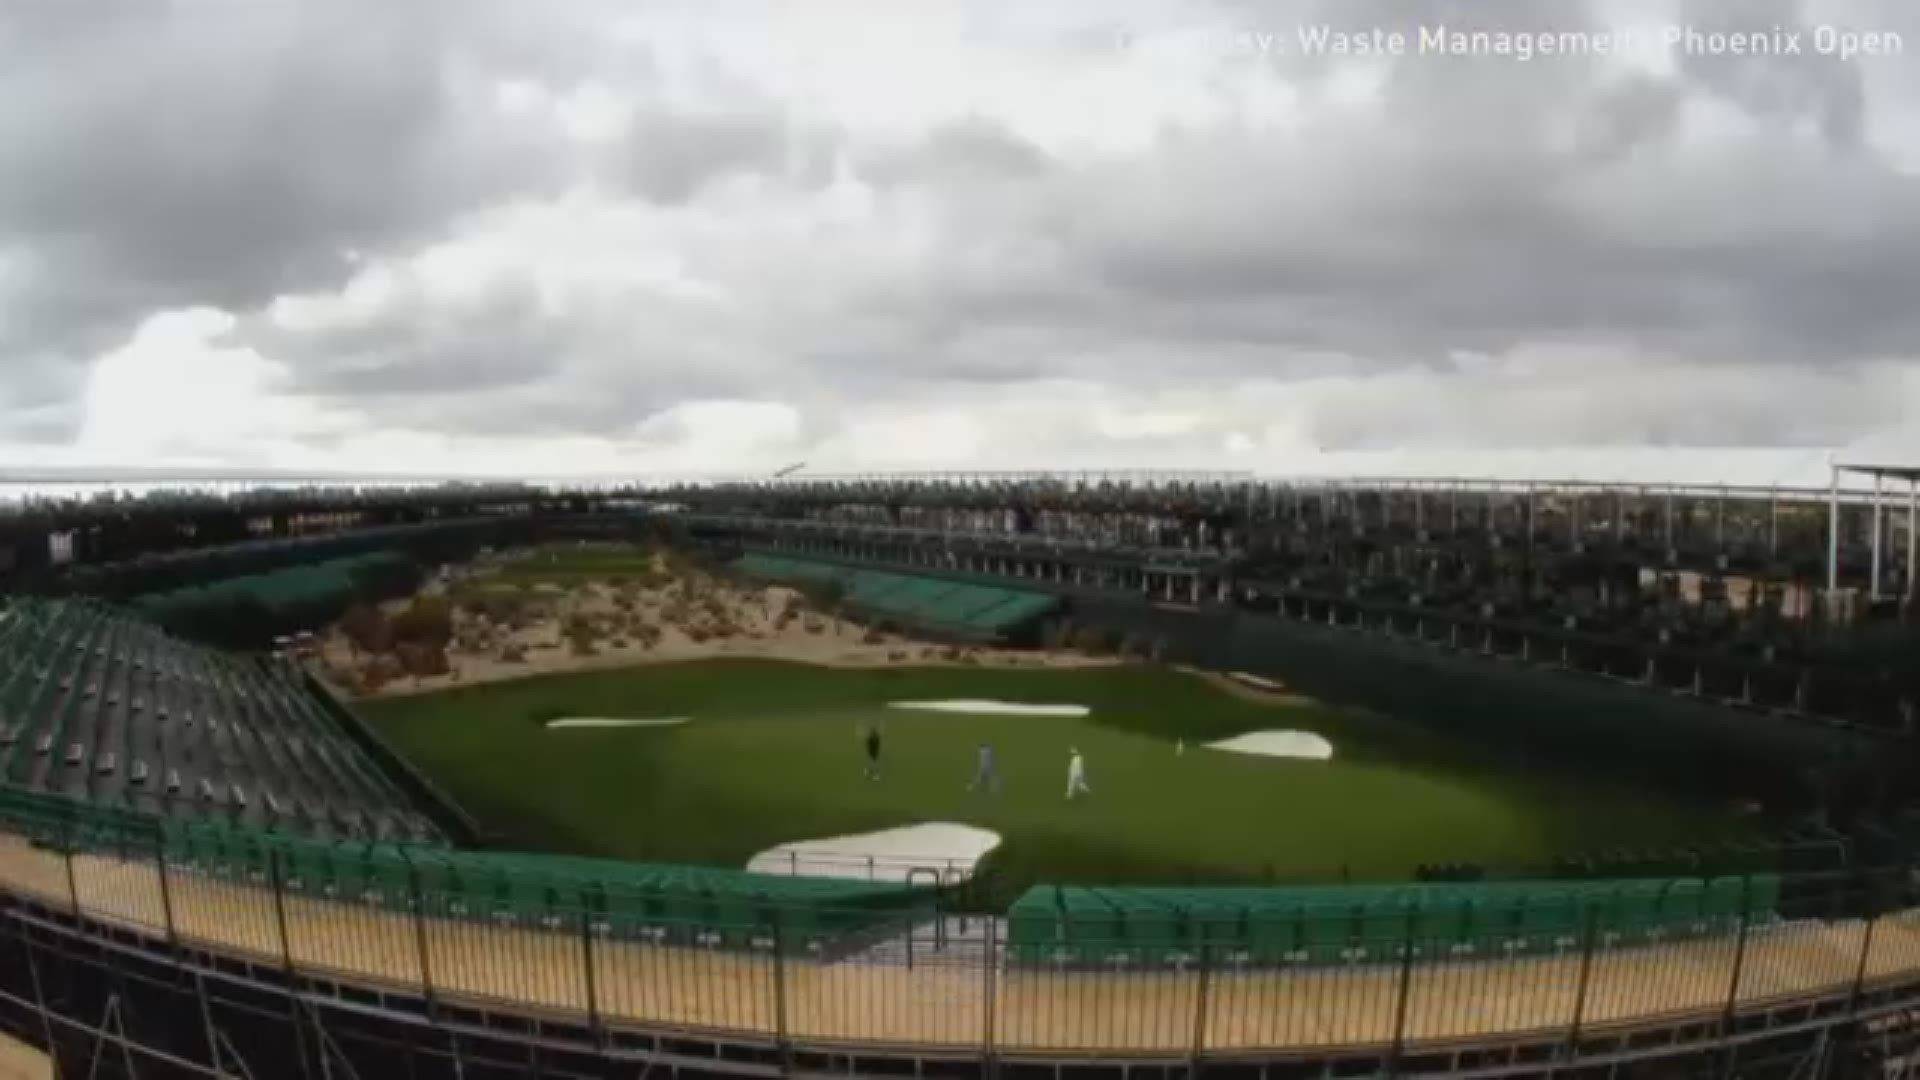 Time-lapse video shows the construction of the stadium at the famous 16th hole of TPC Scottsdale.